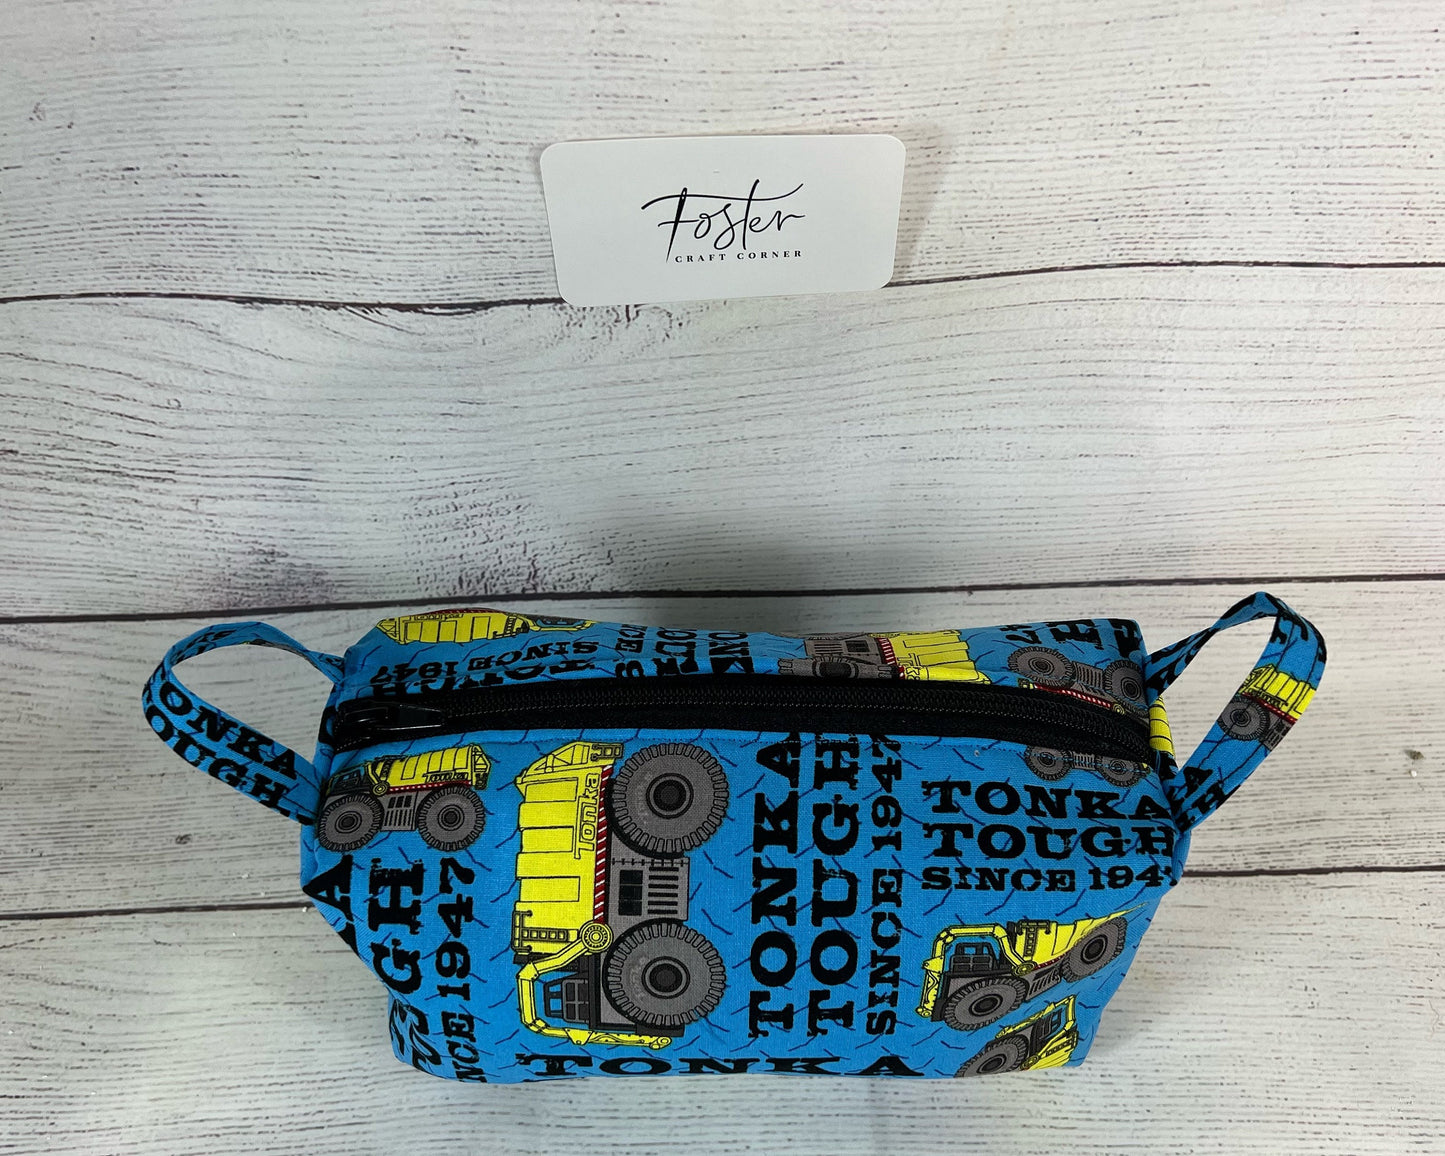 Kids Toiletry Bag - Kids Travel Pouch - Zip Pouch - Kids Pouch - Kids Zippered Carry Case - Bathroom Travel Pouch - Travel Bag - Traveling